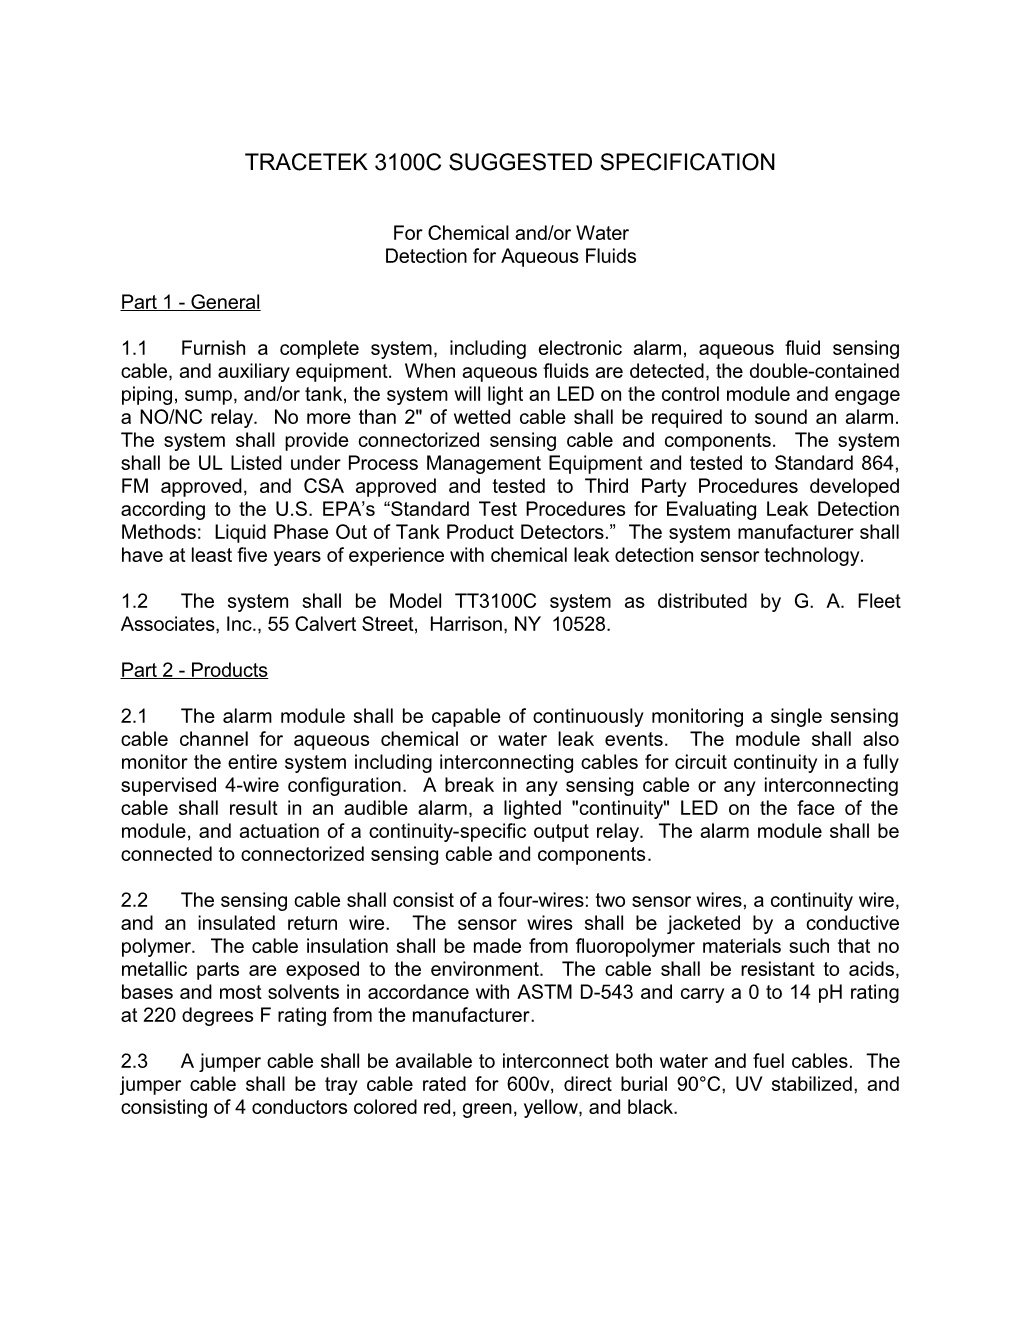 Tracetek 3000 Suggested Specification